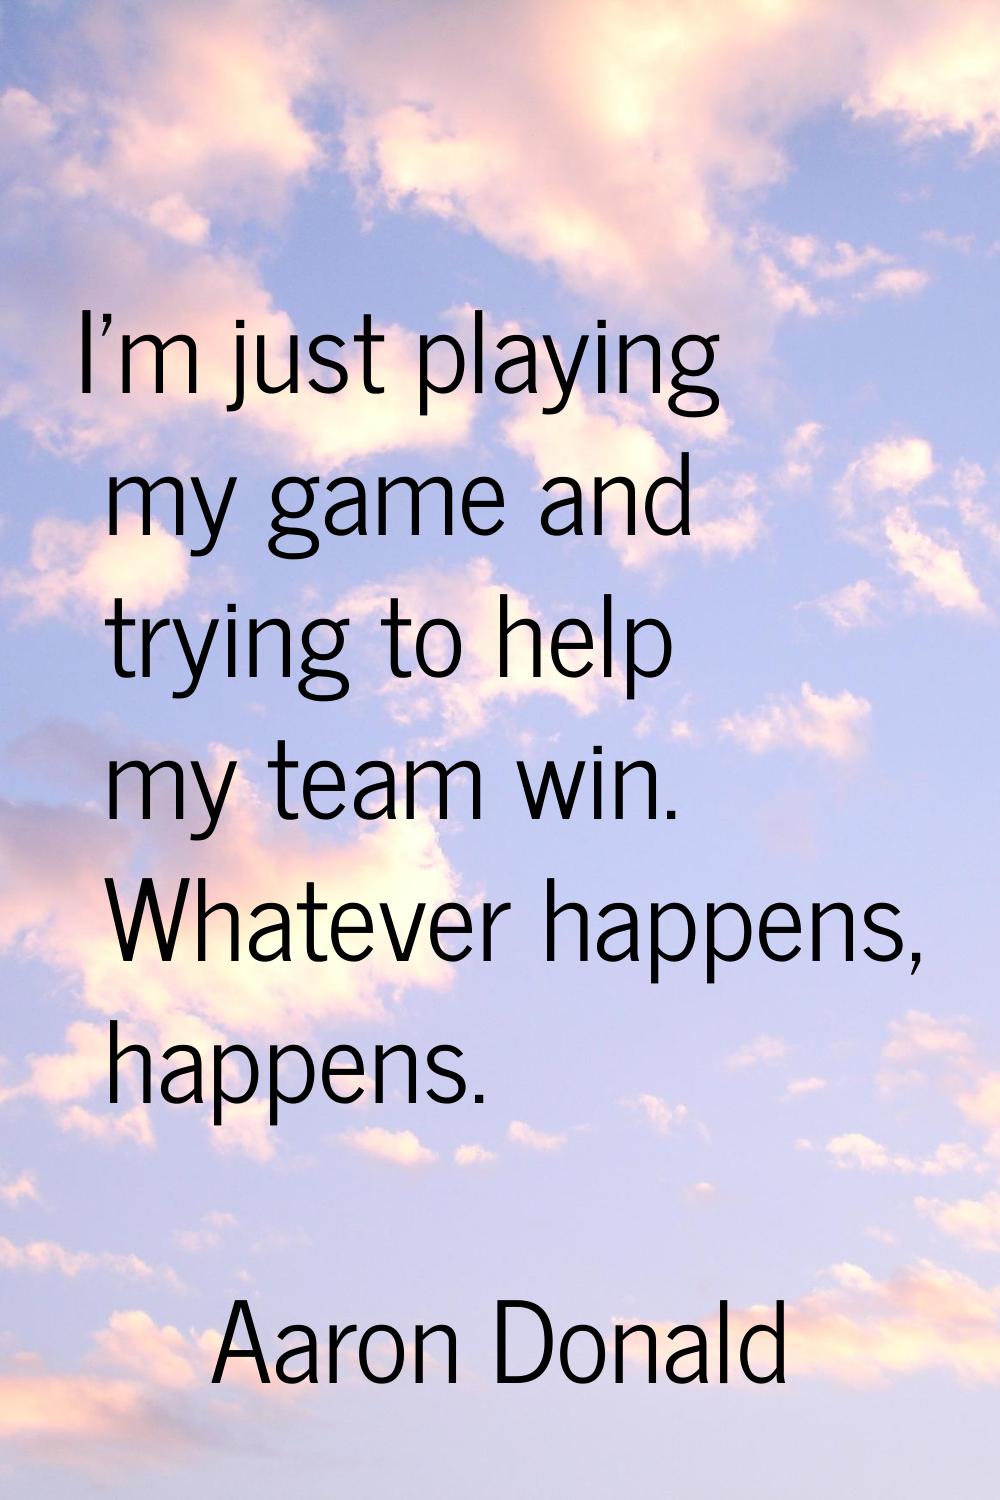 I'm just playing my game and trying to help my team win. Whatever happens, happens.